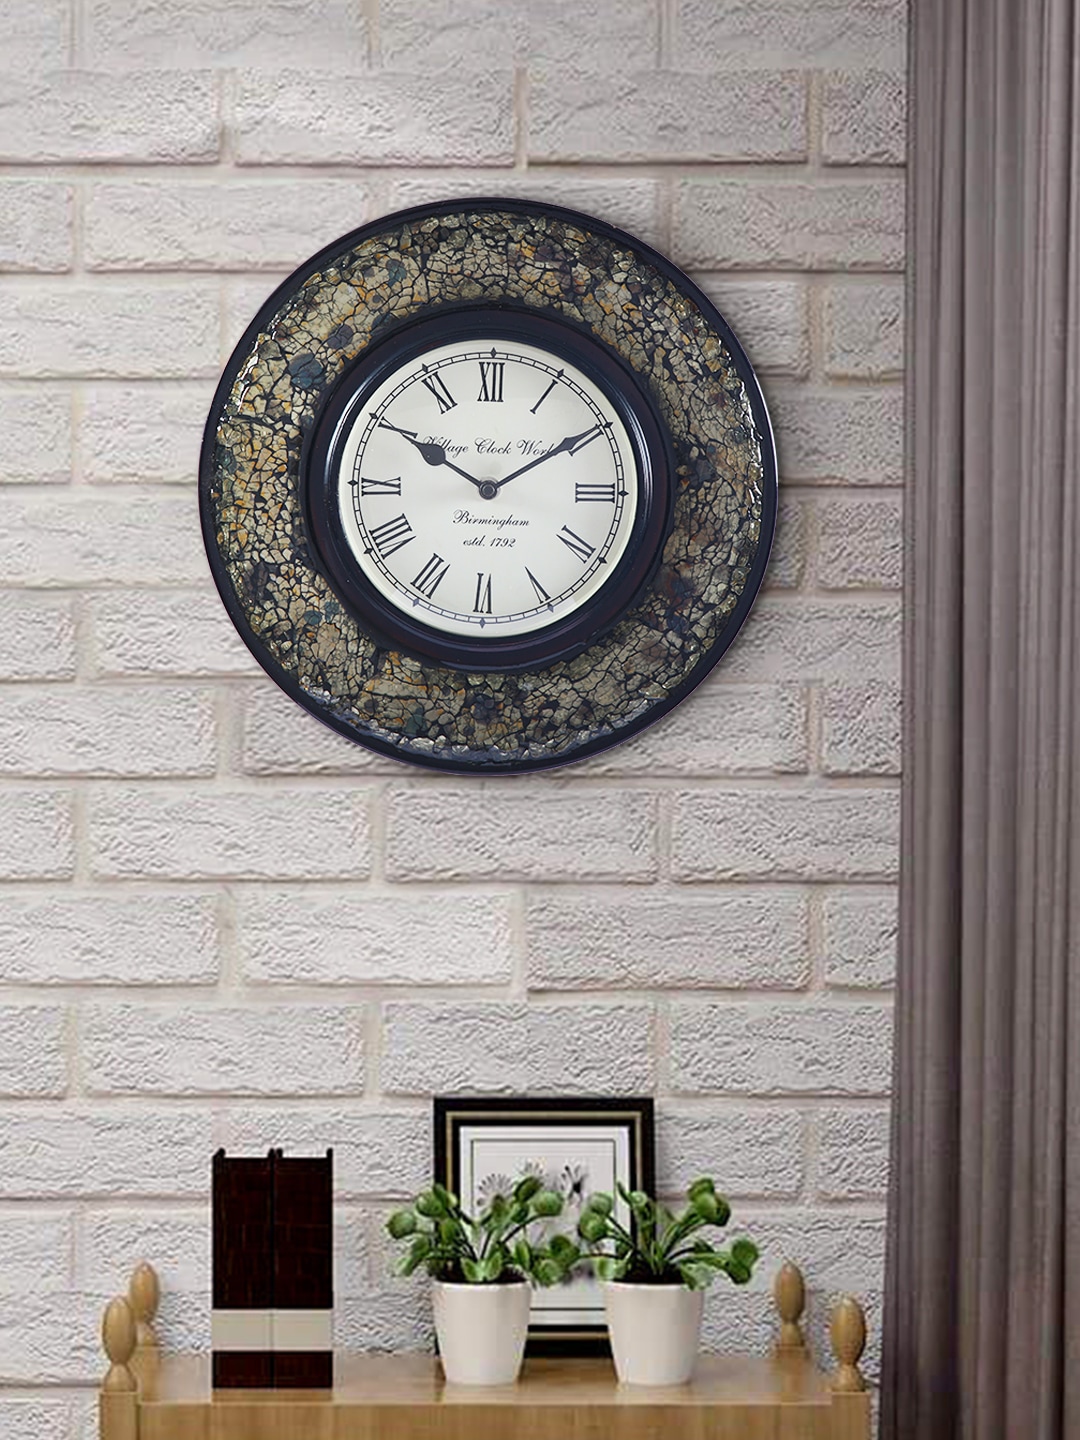 Aapno Rajasthan Black & Navy Blue Textured Contemporary Wall Clock Price in India